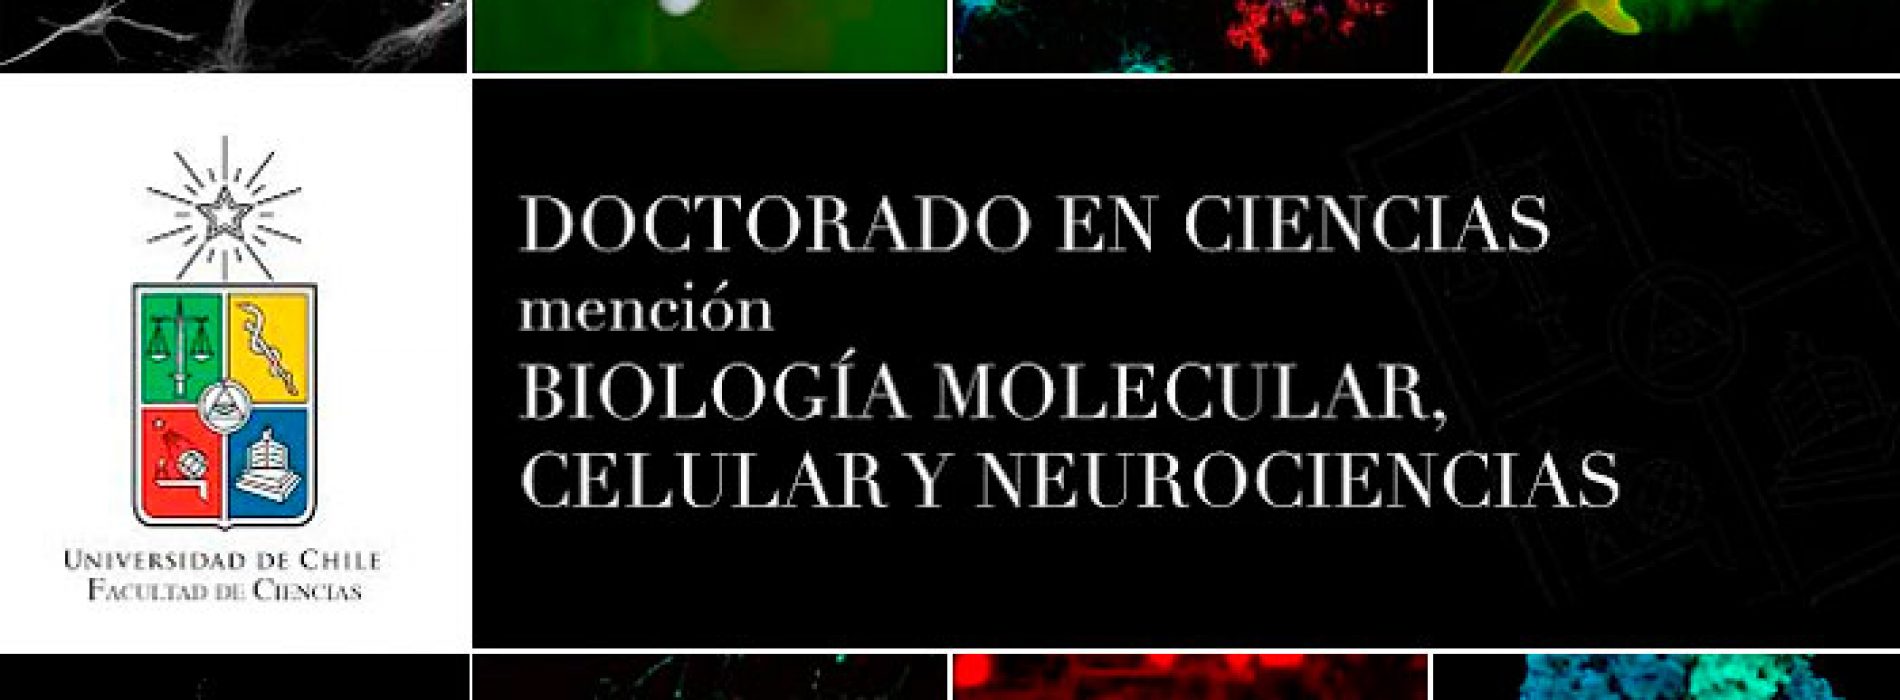 Doctorate in Sciences mention Molecular, cell biology and neuroscience